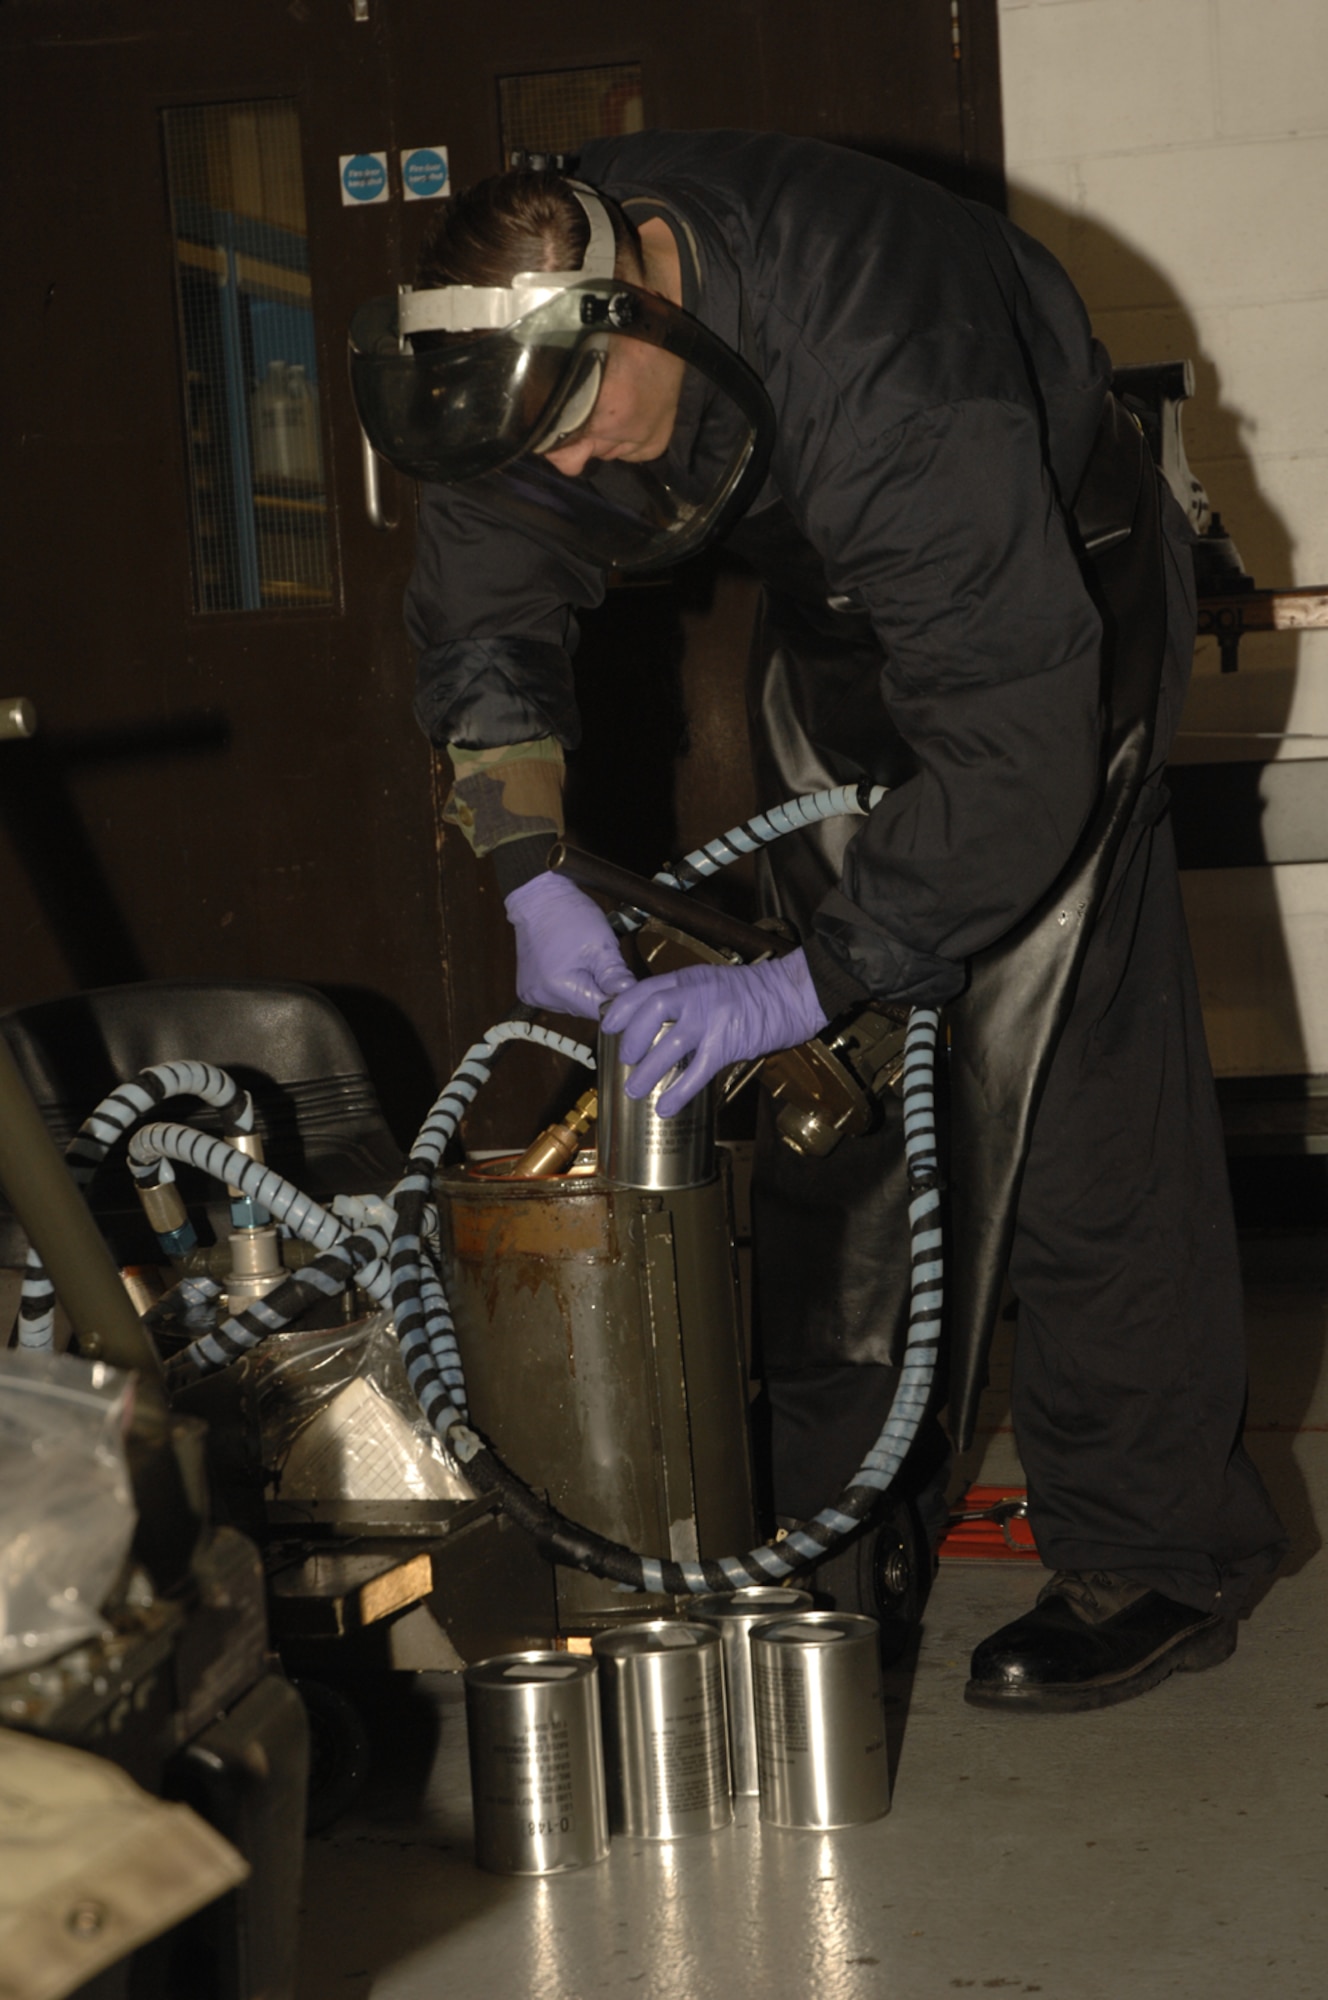 Airman 1st Class Benjamin Peterson, 48th EMS, trouble shoots an oil carton for leaks.
Airman Peterson is part of the aerospace ground equipment flight which maintains
equipment used to re-supply RAF Lakenheath’s F-15C Eagles and F-15E Strike
Eagles. (Air Force photo by Airman 1st Class Jessica Snow)
